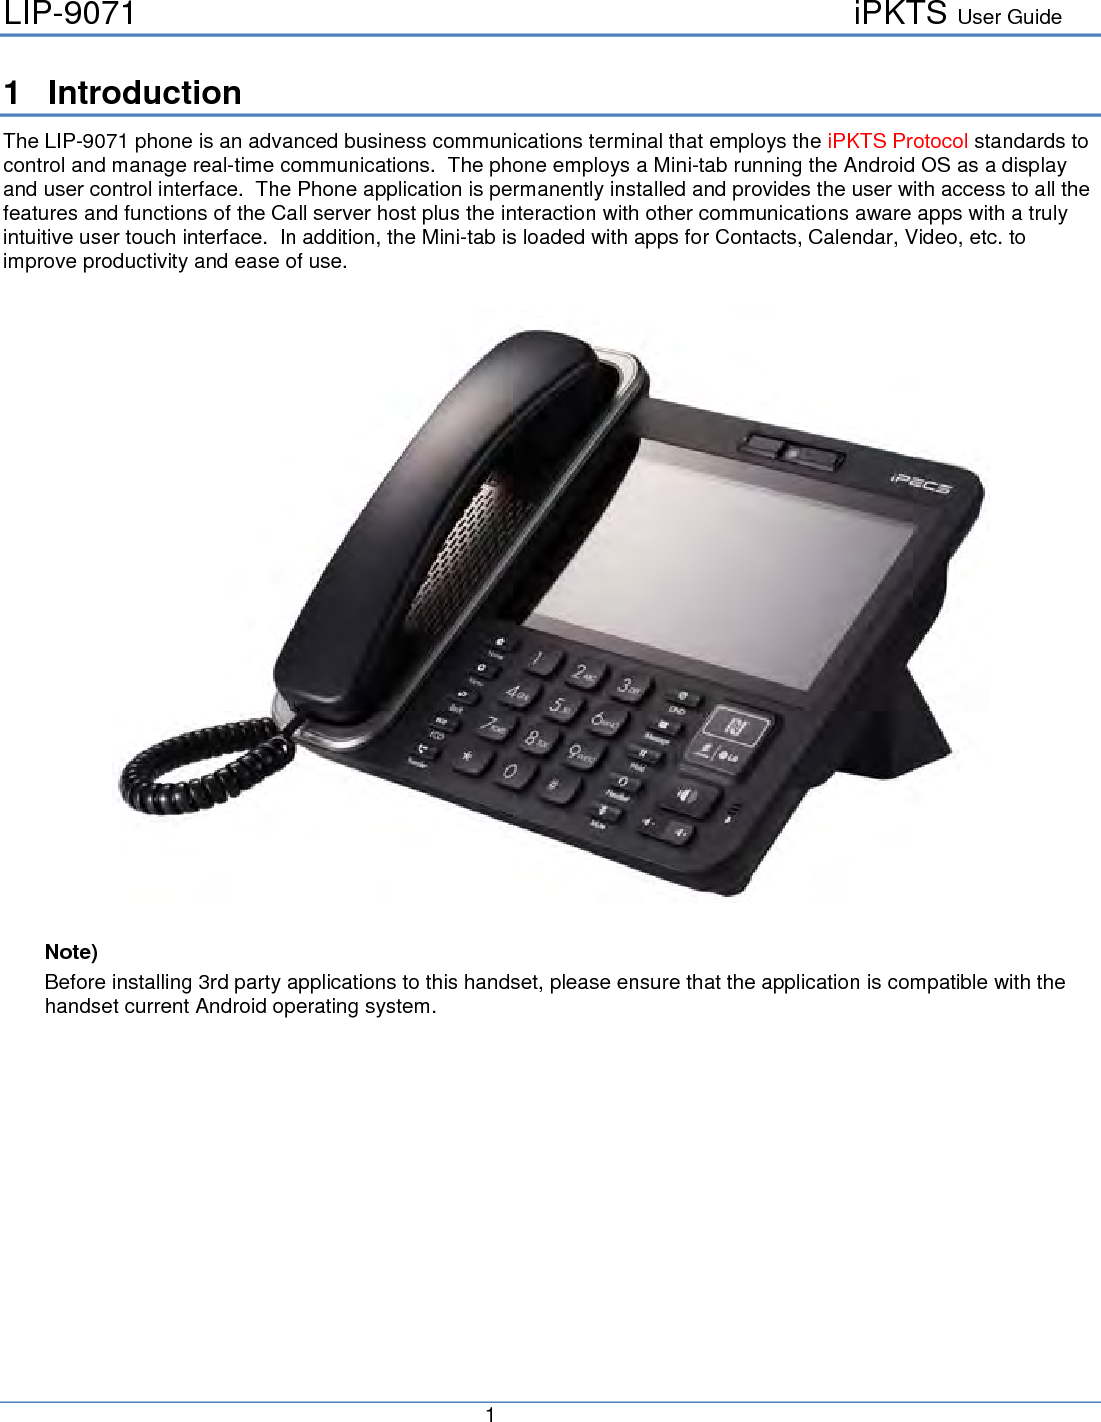 LIP-9071     iPKTS User Guide      1   1  Introduction The LIP-9071 phone is an advanced business communications terminal that employs the iPKTS Protocol standards to control and manage real-time communications.  The phone employs a Mini-tab running the Android OS as a display and user control interface.  The Phone application is permanently installed and provides the user with access to all the features and functions of the Call server host plus the interaction with other communications aware apps with a truly intuitive user touch interface.  In addition, the Mini-tab is loaded with apps for Contacts, Calendar, Video, etc. to improve productivity and ease of use.    Note) Before installing 3rd party applications to this handset, please ensure that the application is compatible with the handset current Android operating system.     